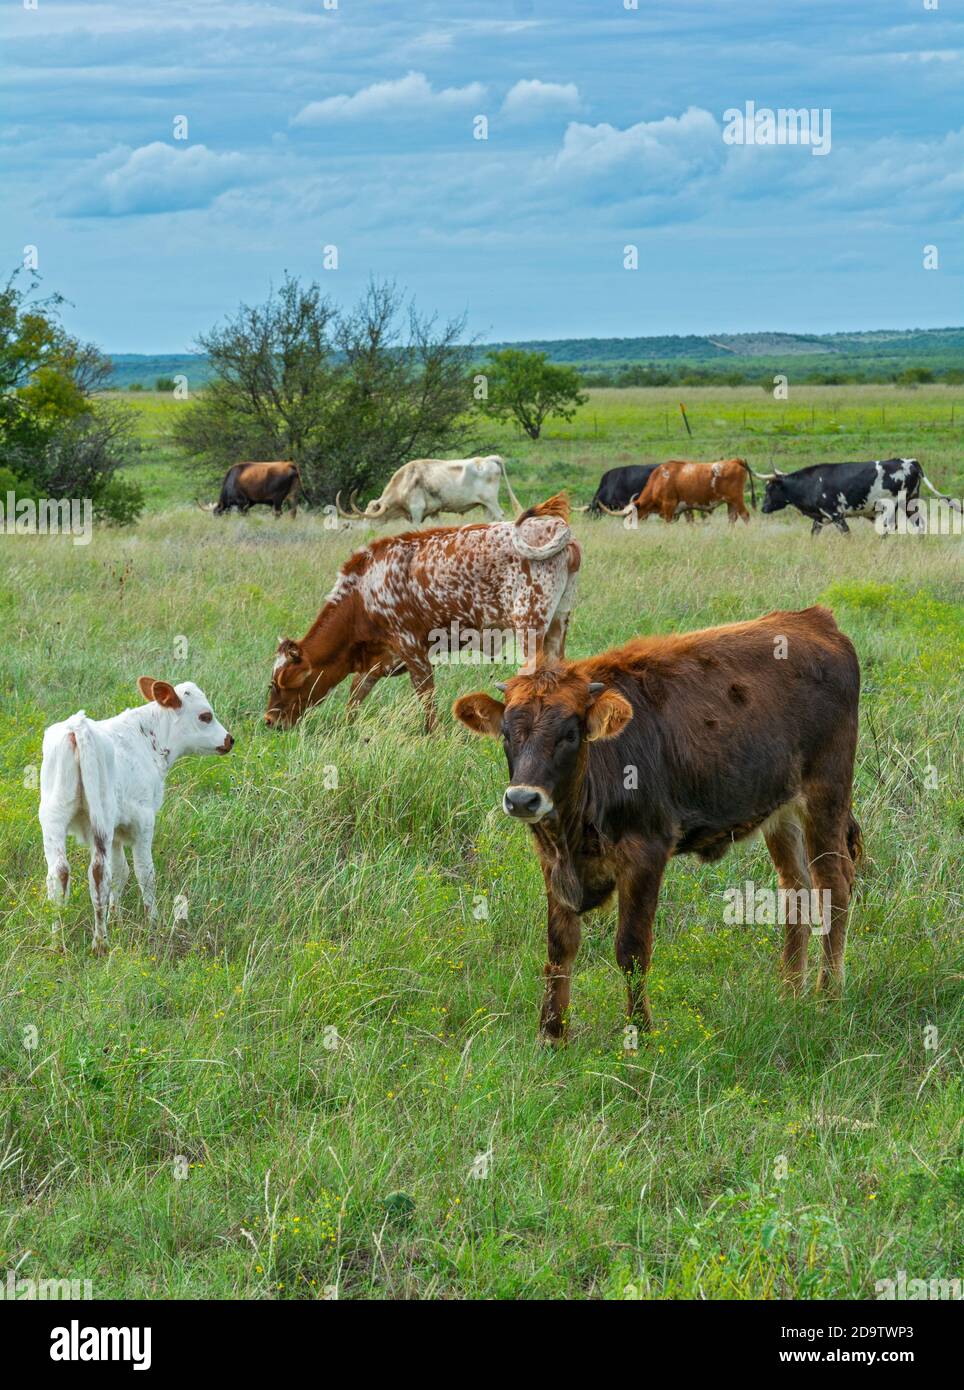 Texas Forts Trail, Shackelford County, Albany, Fort Griffin State Historic Site, longhorn cattle, calf Stock Photo